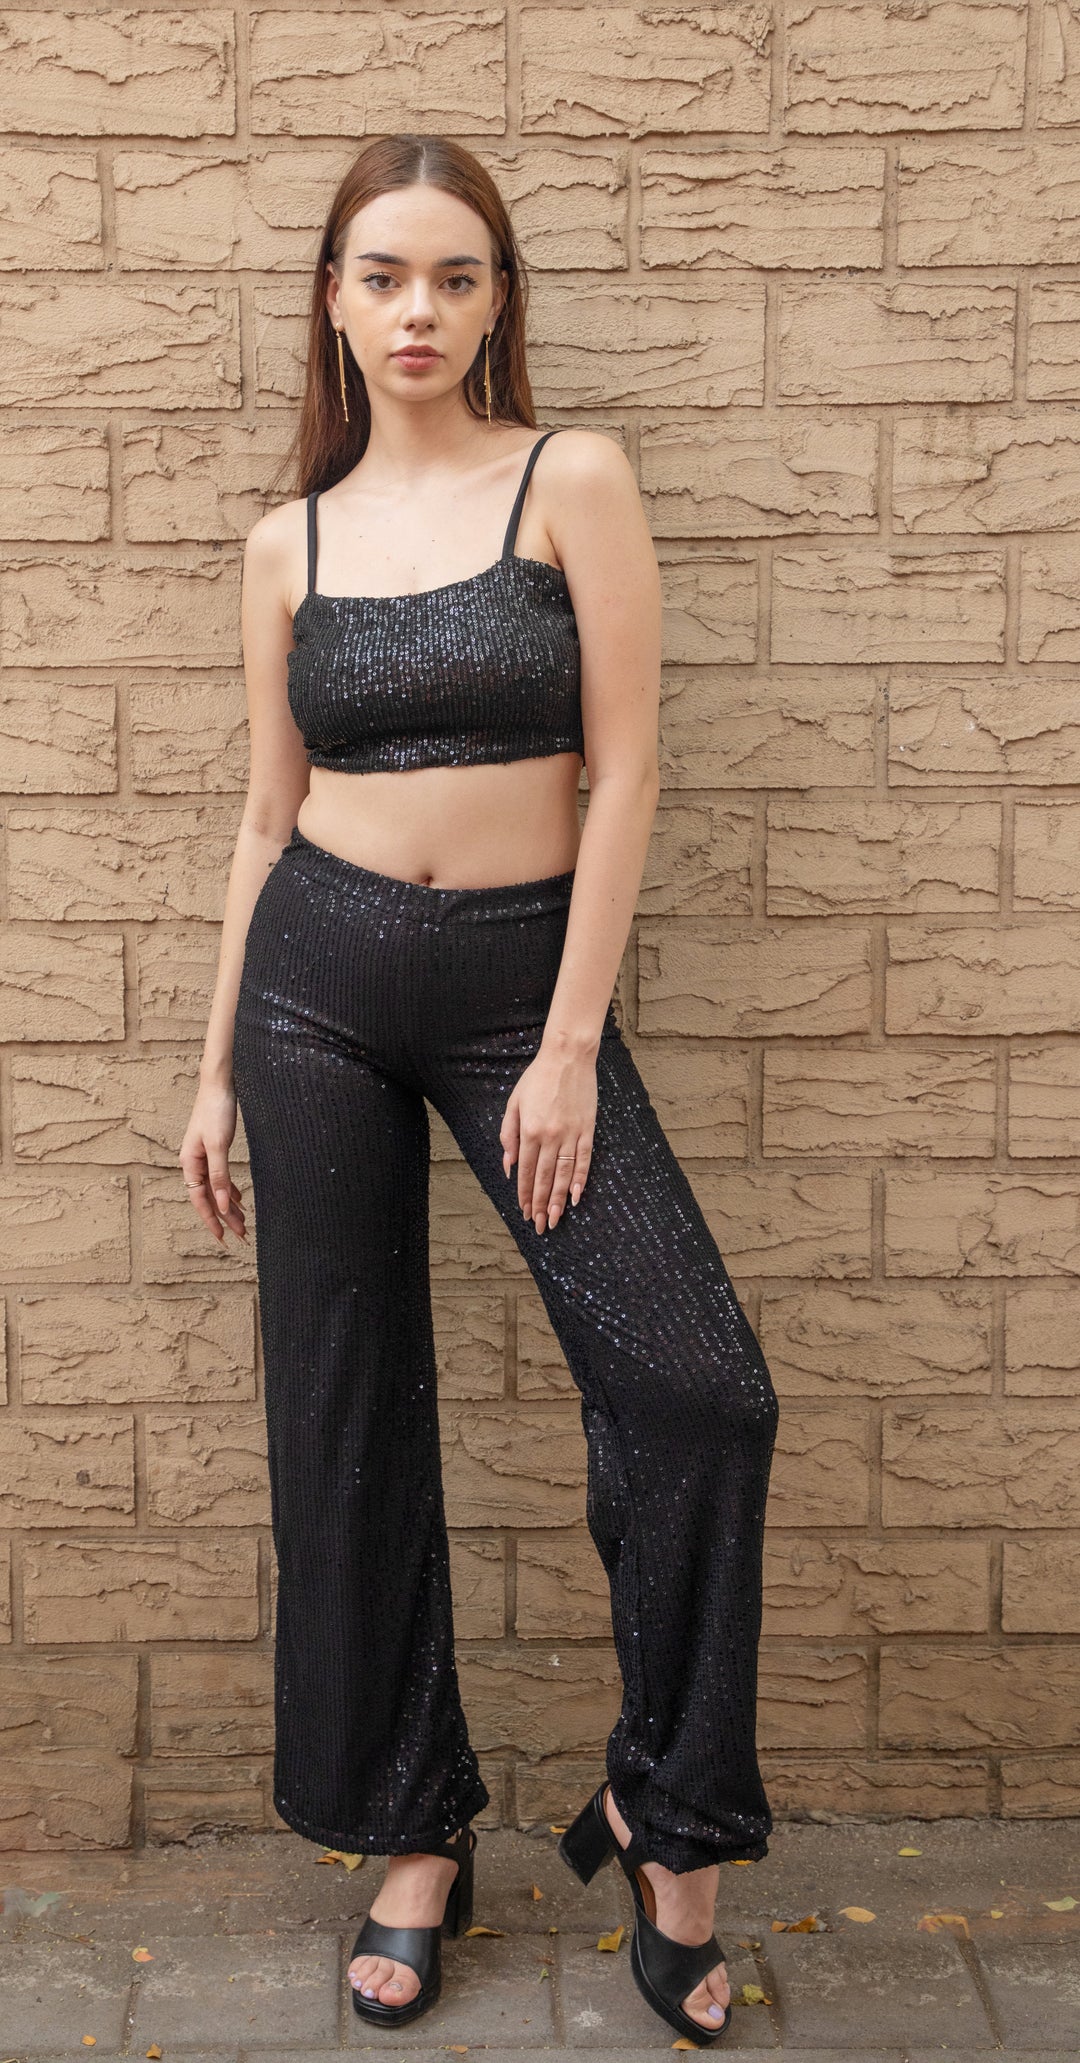 Black Bling Cropped Top